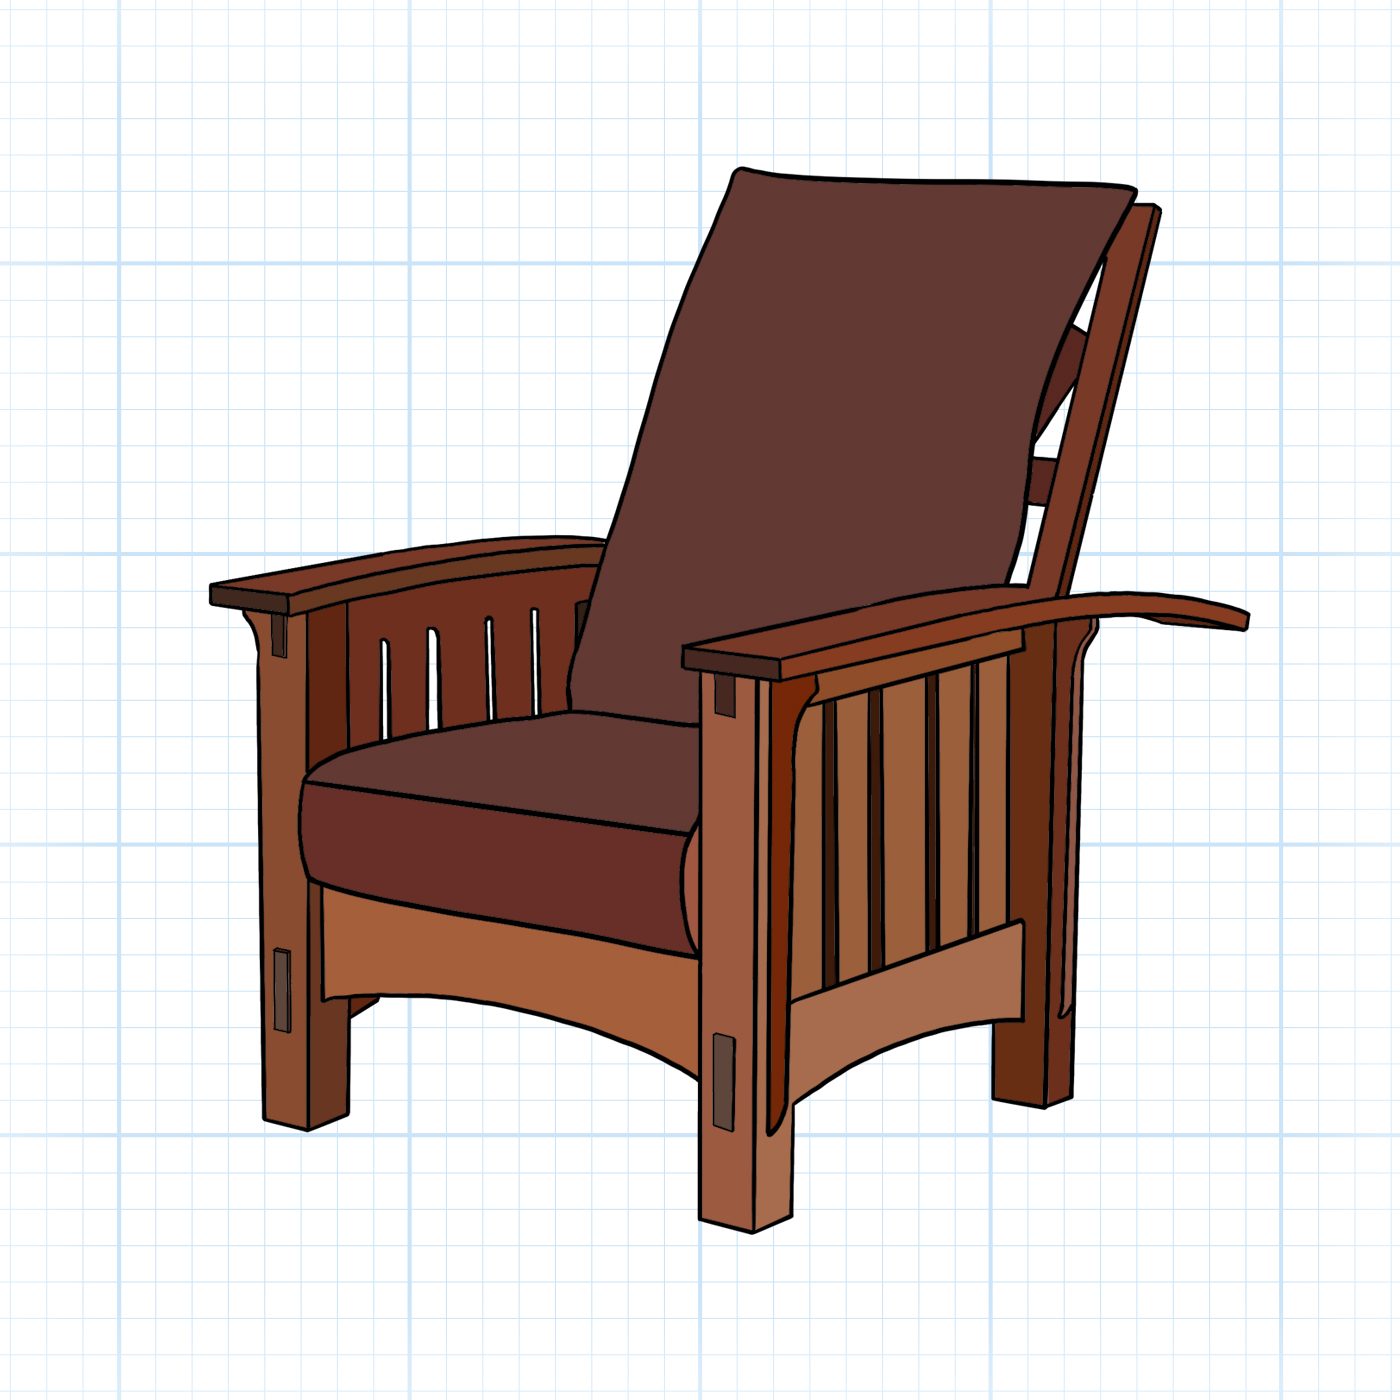 Art And Craft Chair Graphic